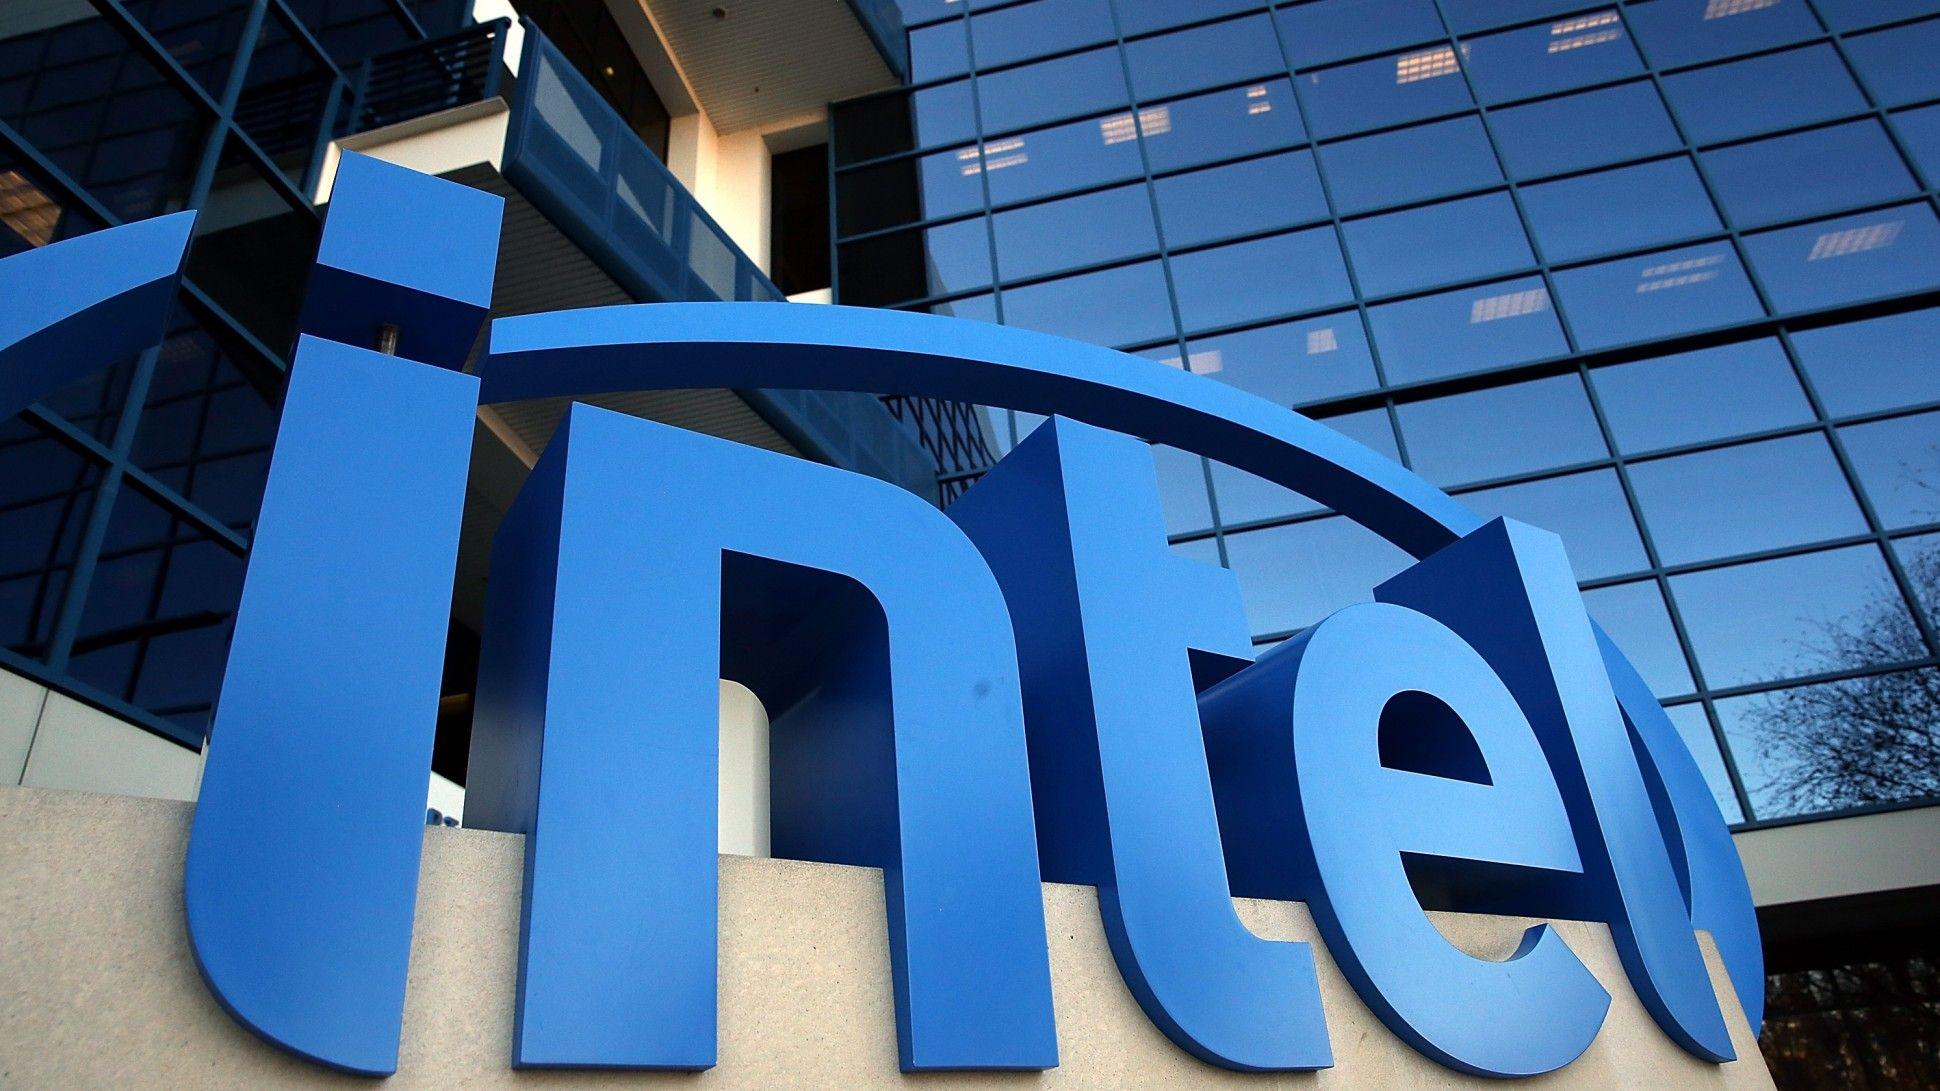 Building with Old Intel Logo - Intel Alert: Chip Maker Patches A Nine Year Old Security Bug Hidden